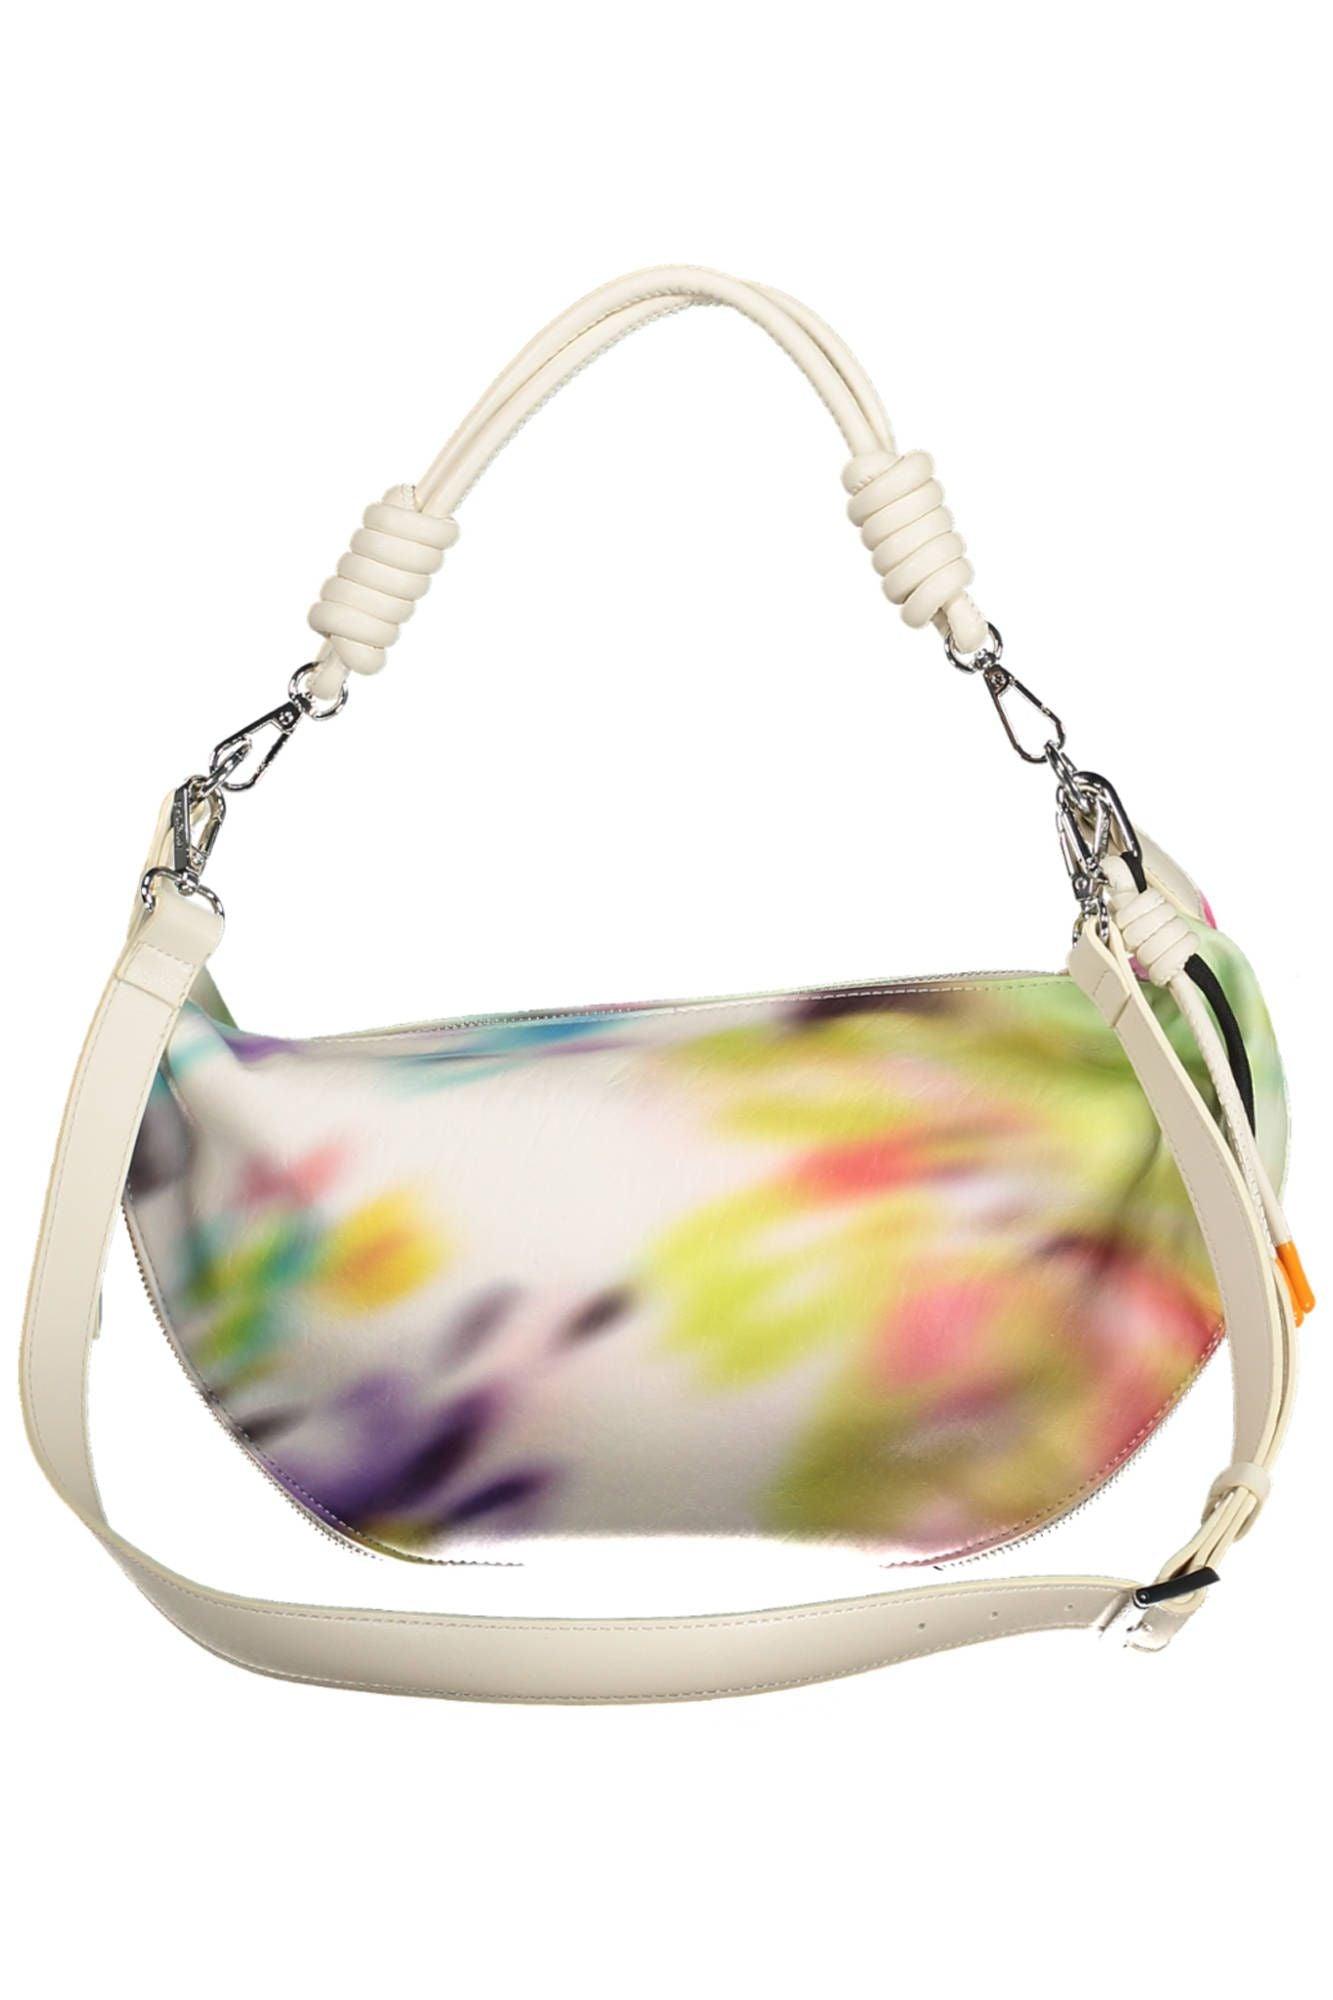 Desigual Chic White Expandable Handbag with Contrasting Accents - PER.FASHION